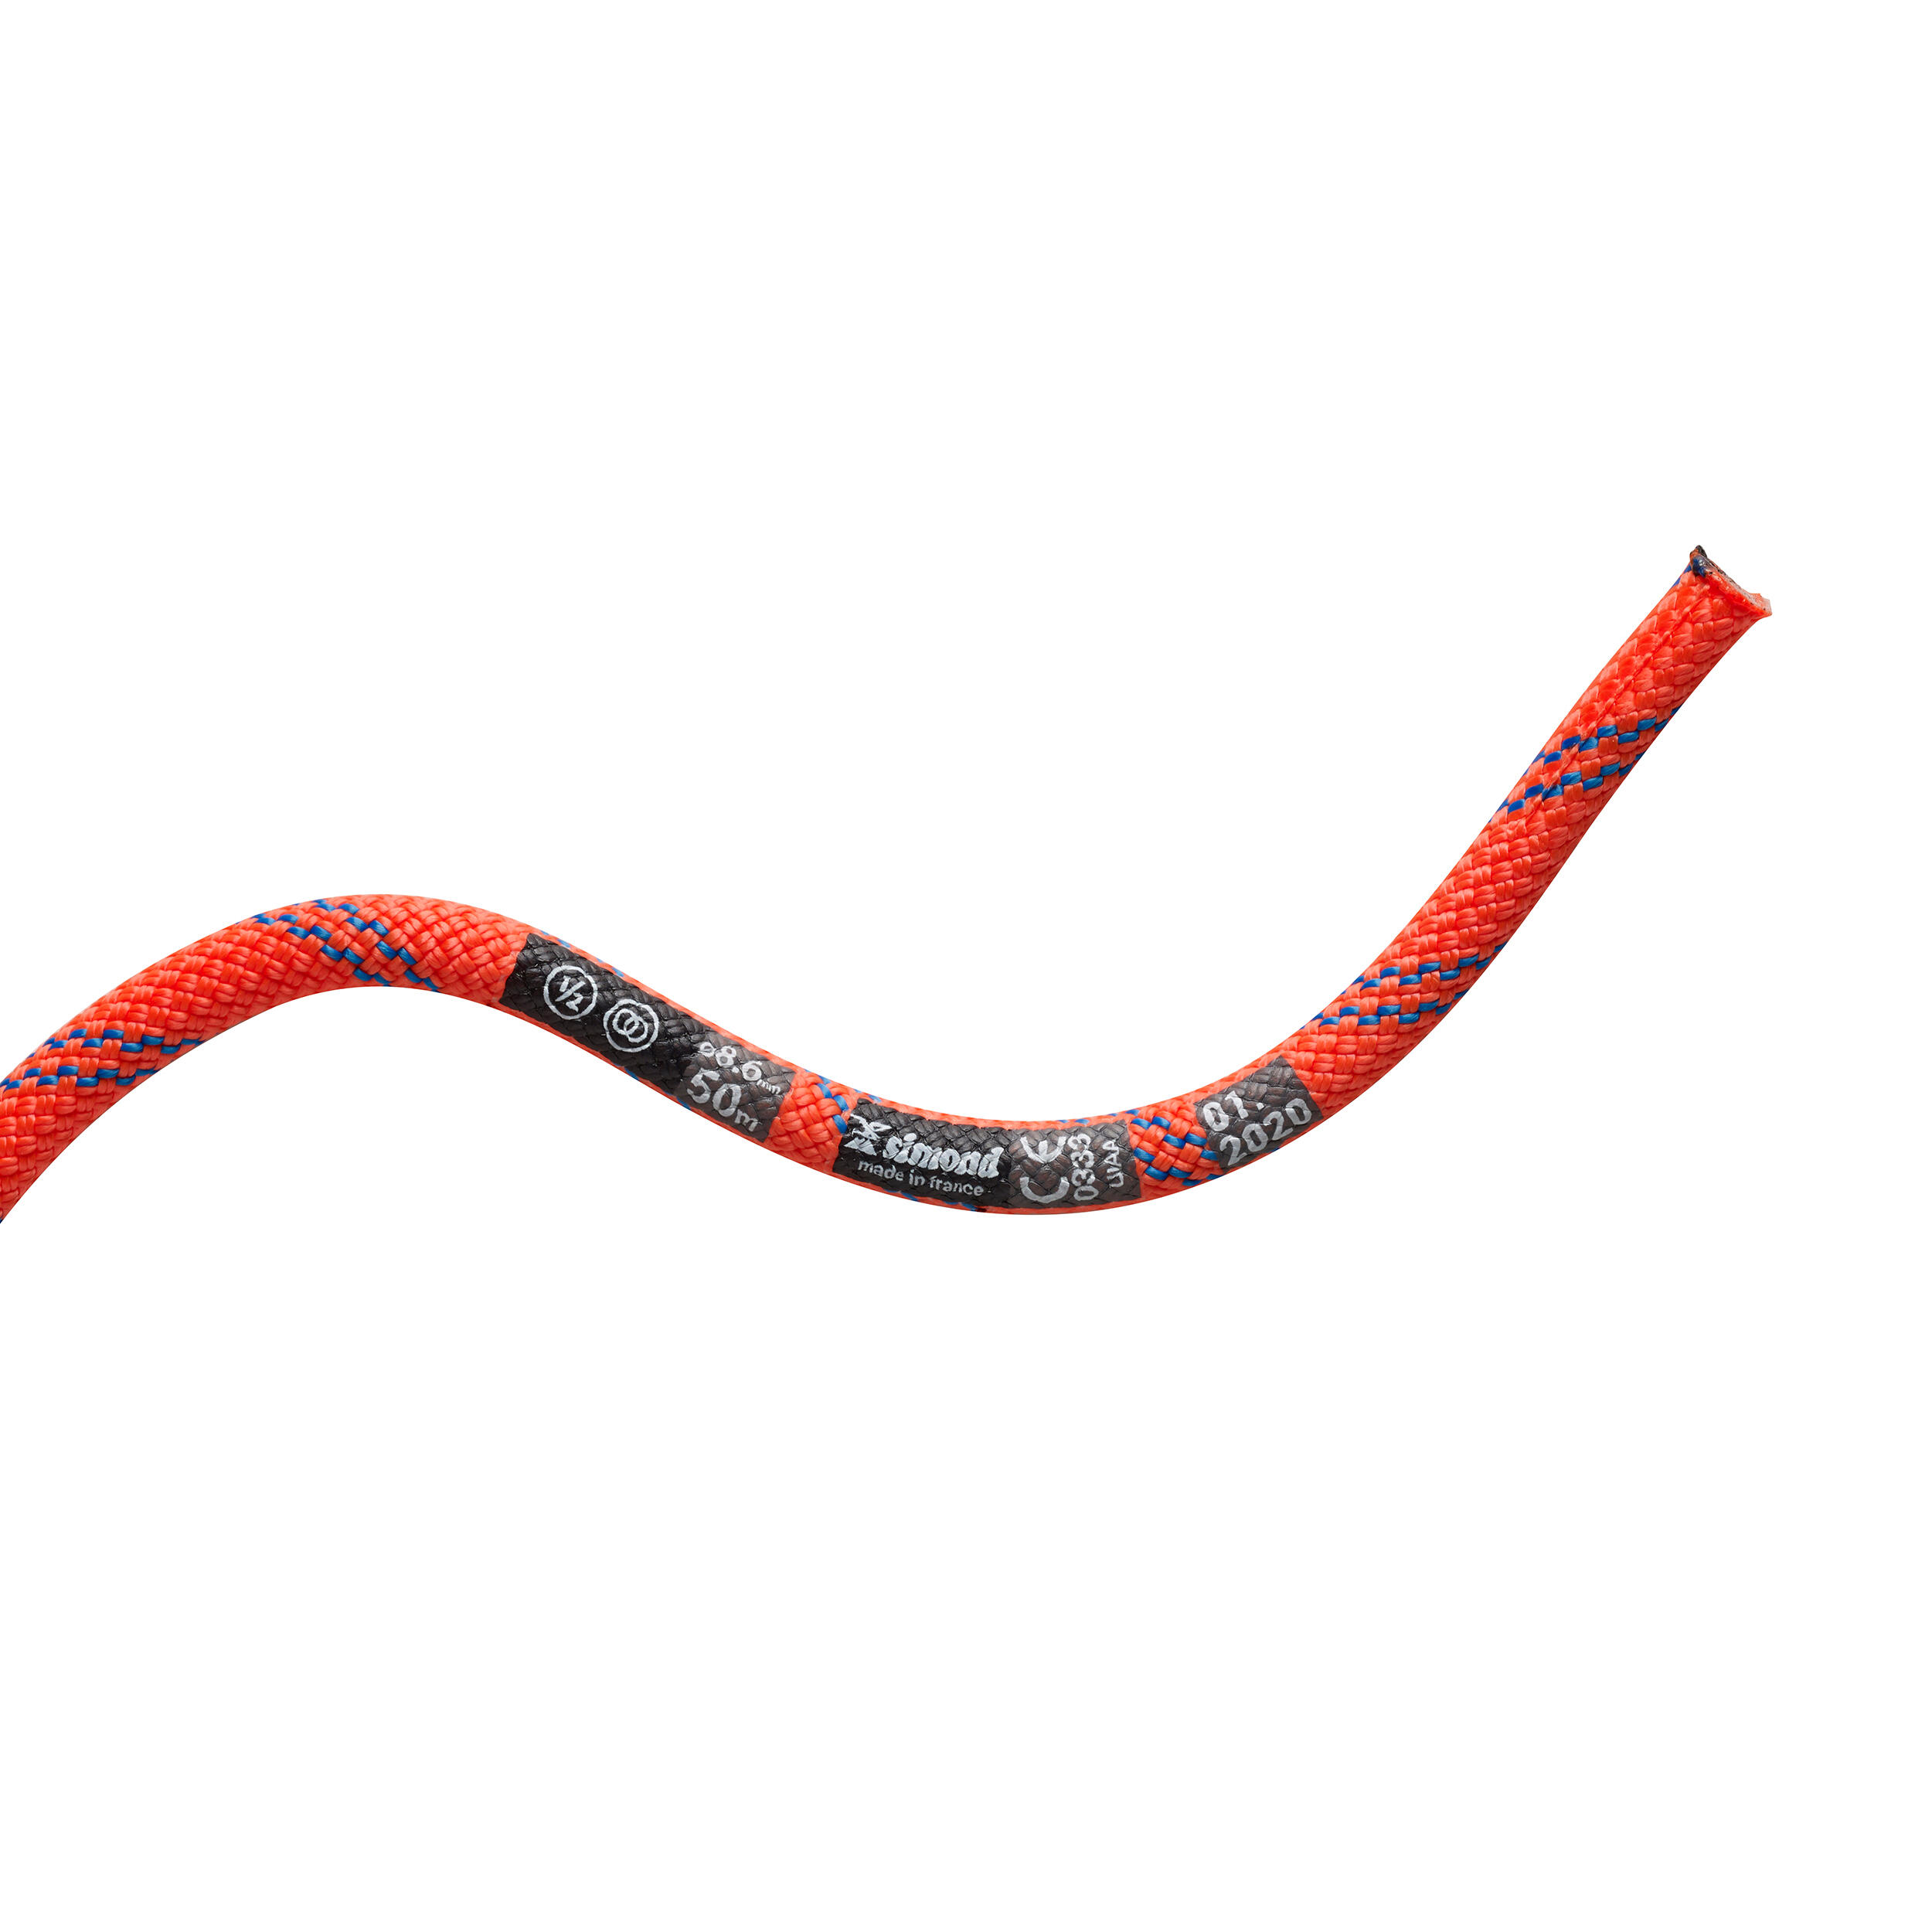 Climbing and mountaineering half rope 8.6 mm x 50 m - RAPPEL 8.6 orange 4/8